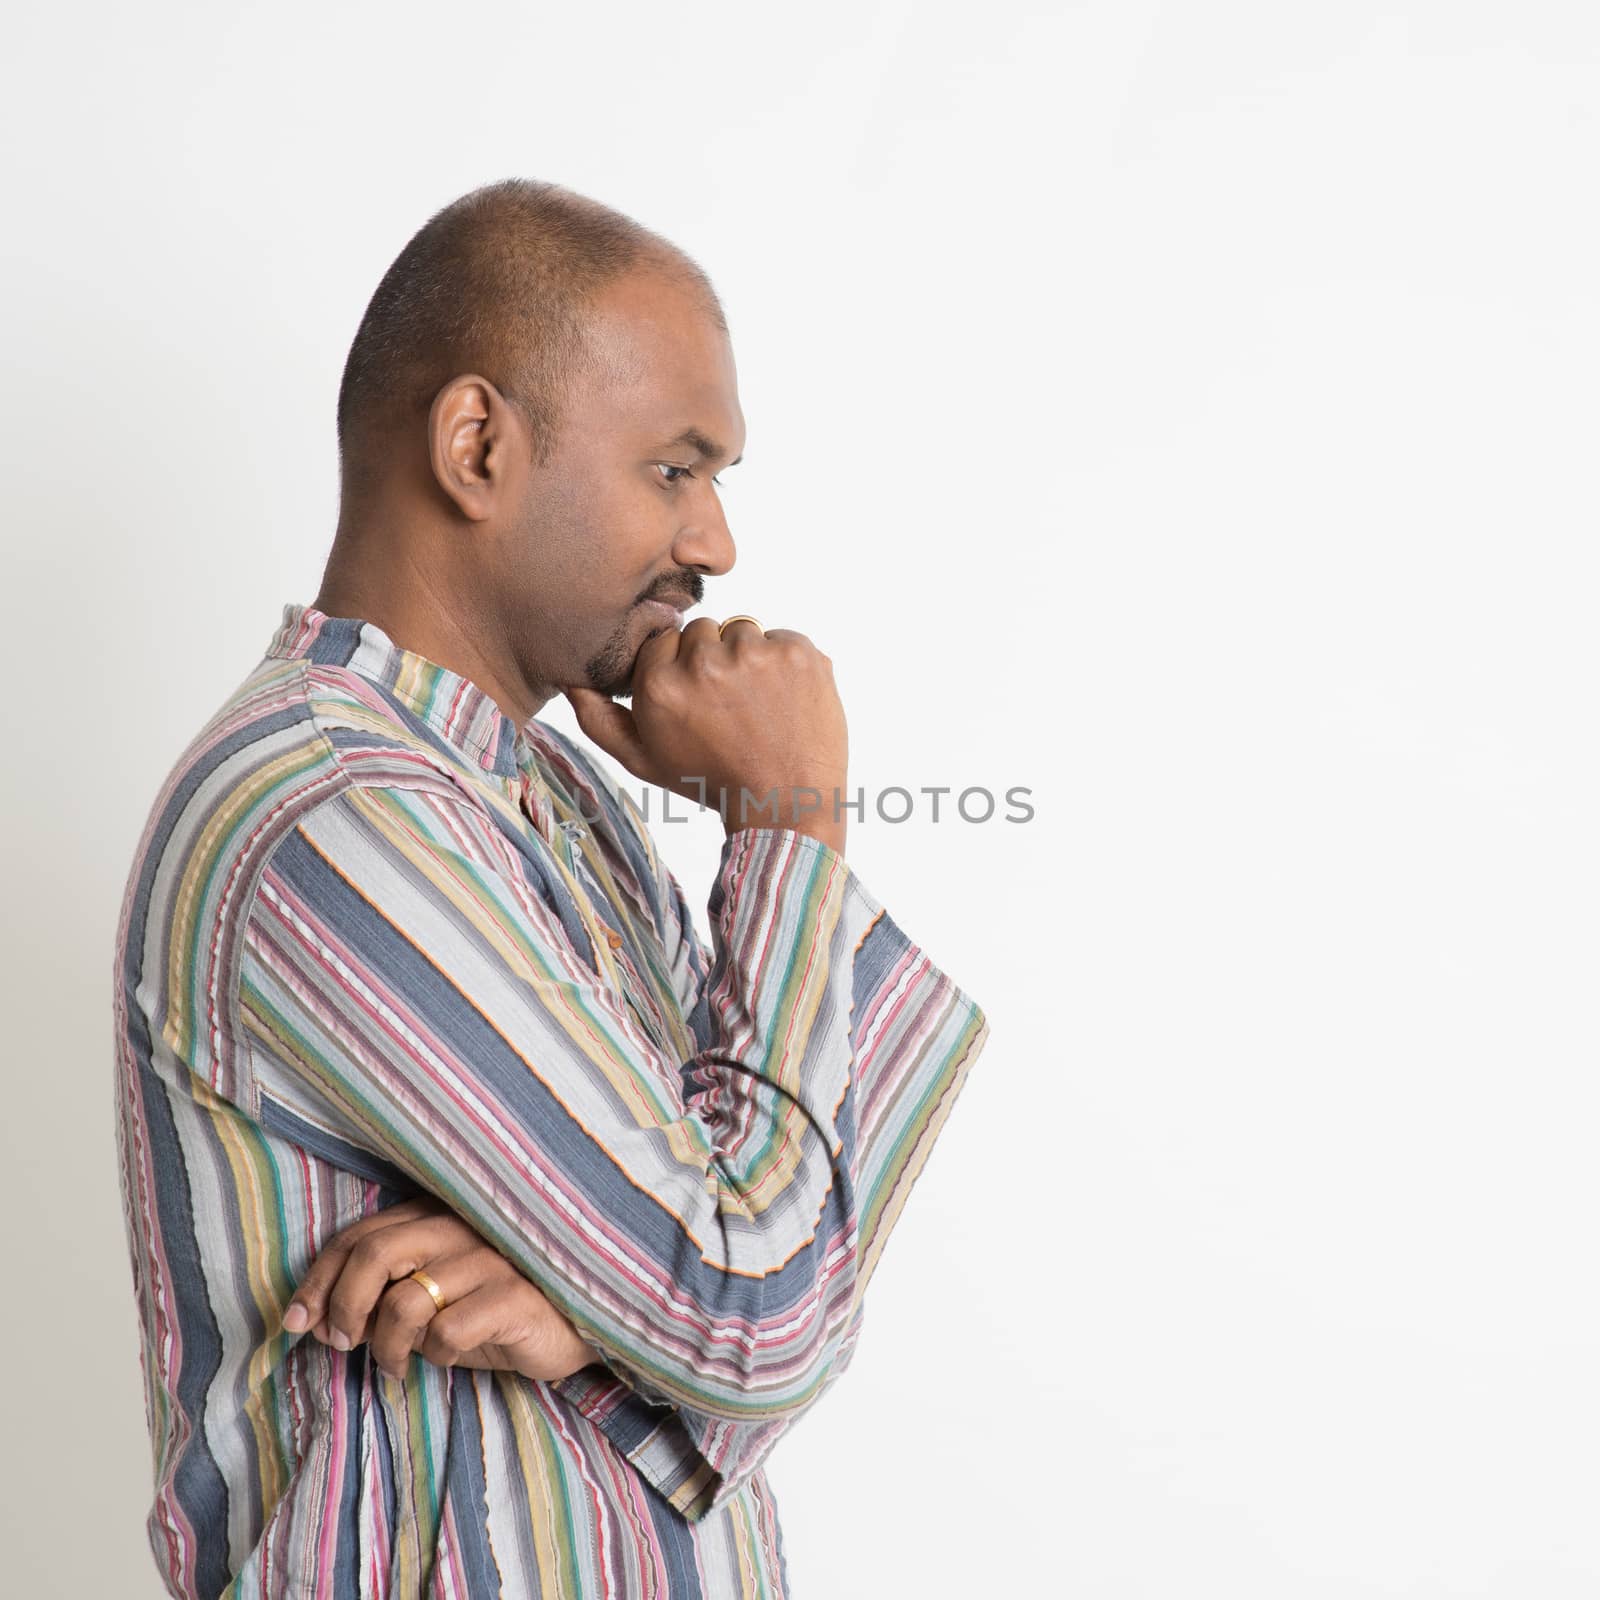 Profile view of mature casual business Indian man thinking, standing on plain background.